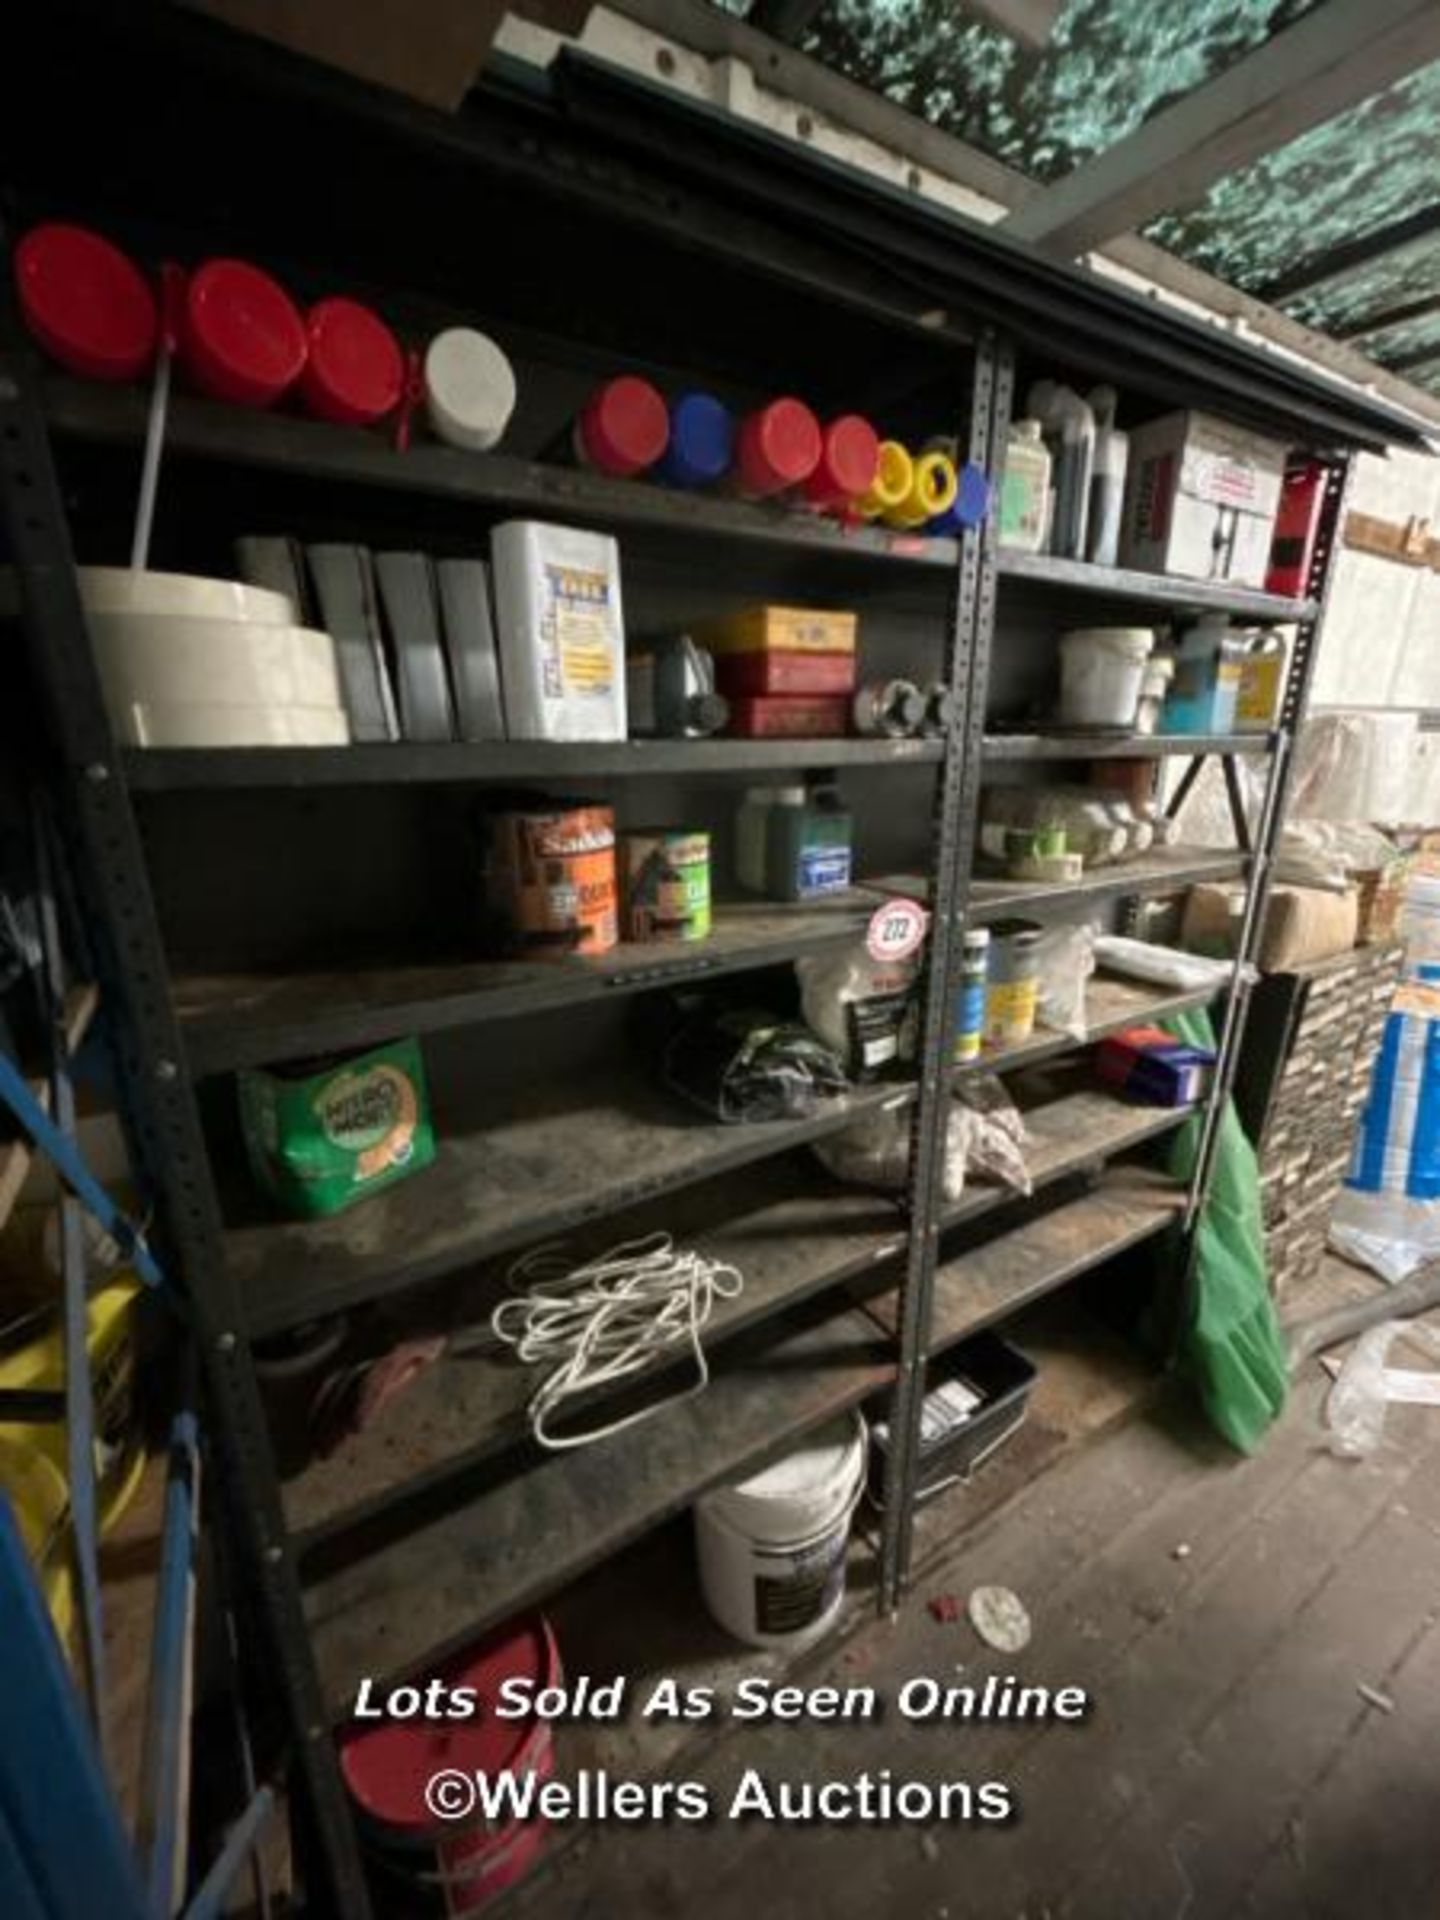 DEXIAN SHELVING UNIT TO INCL. WOODSTAIN, VARNISH, PATINATION OIL, LINE MARKING SPRAY, EXPANDING